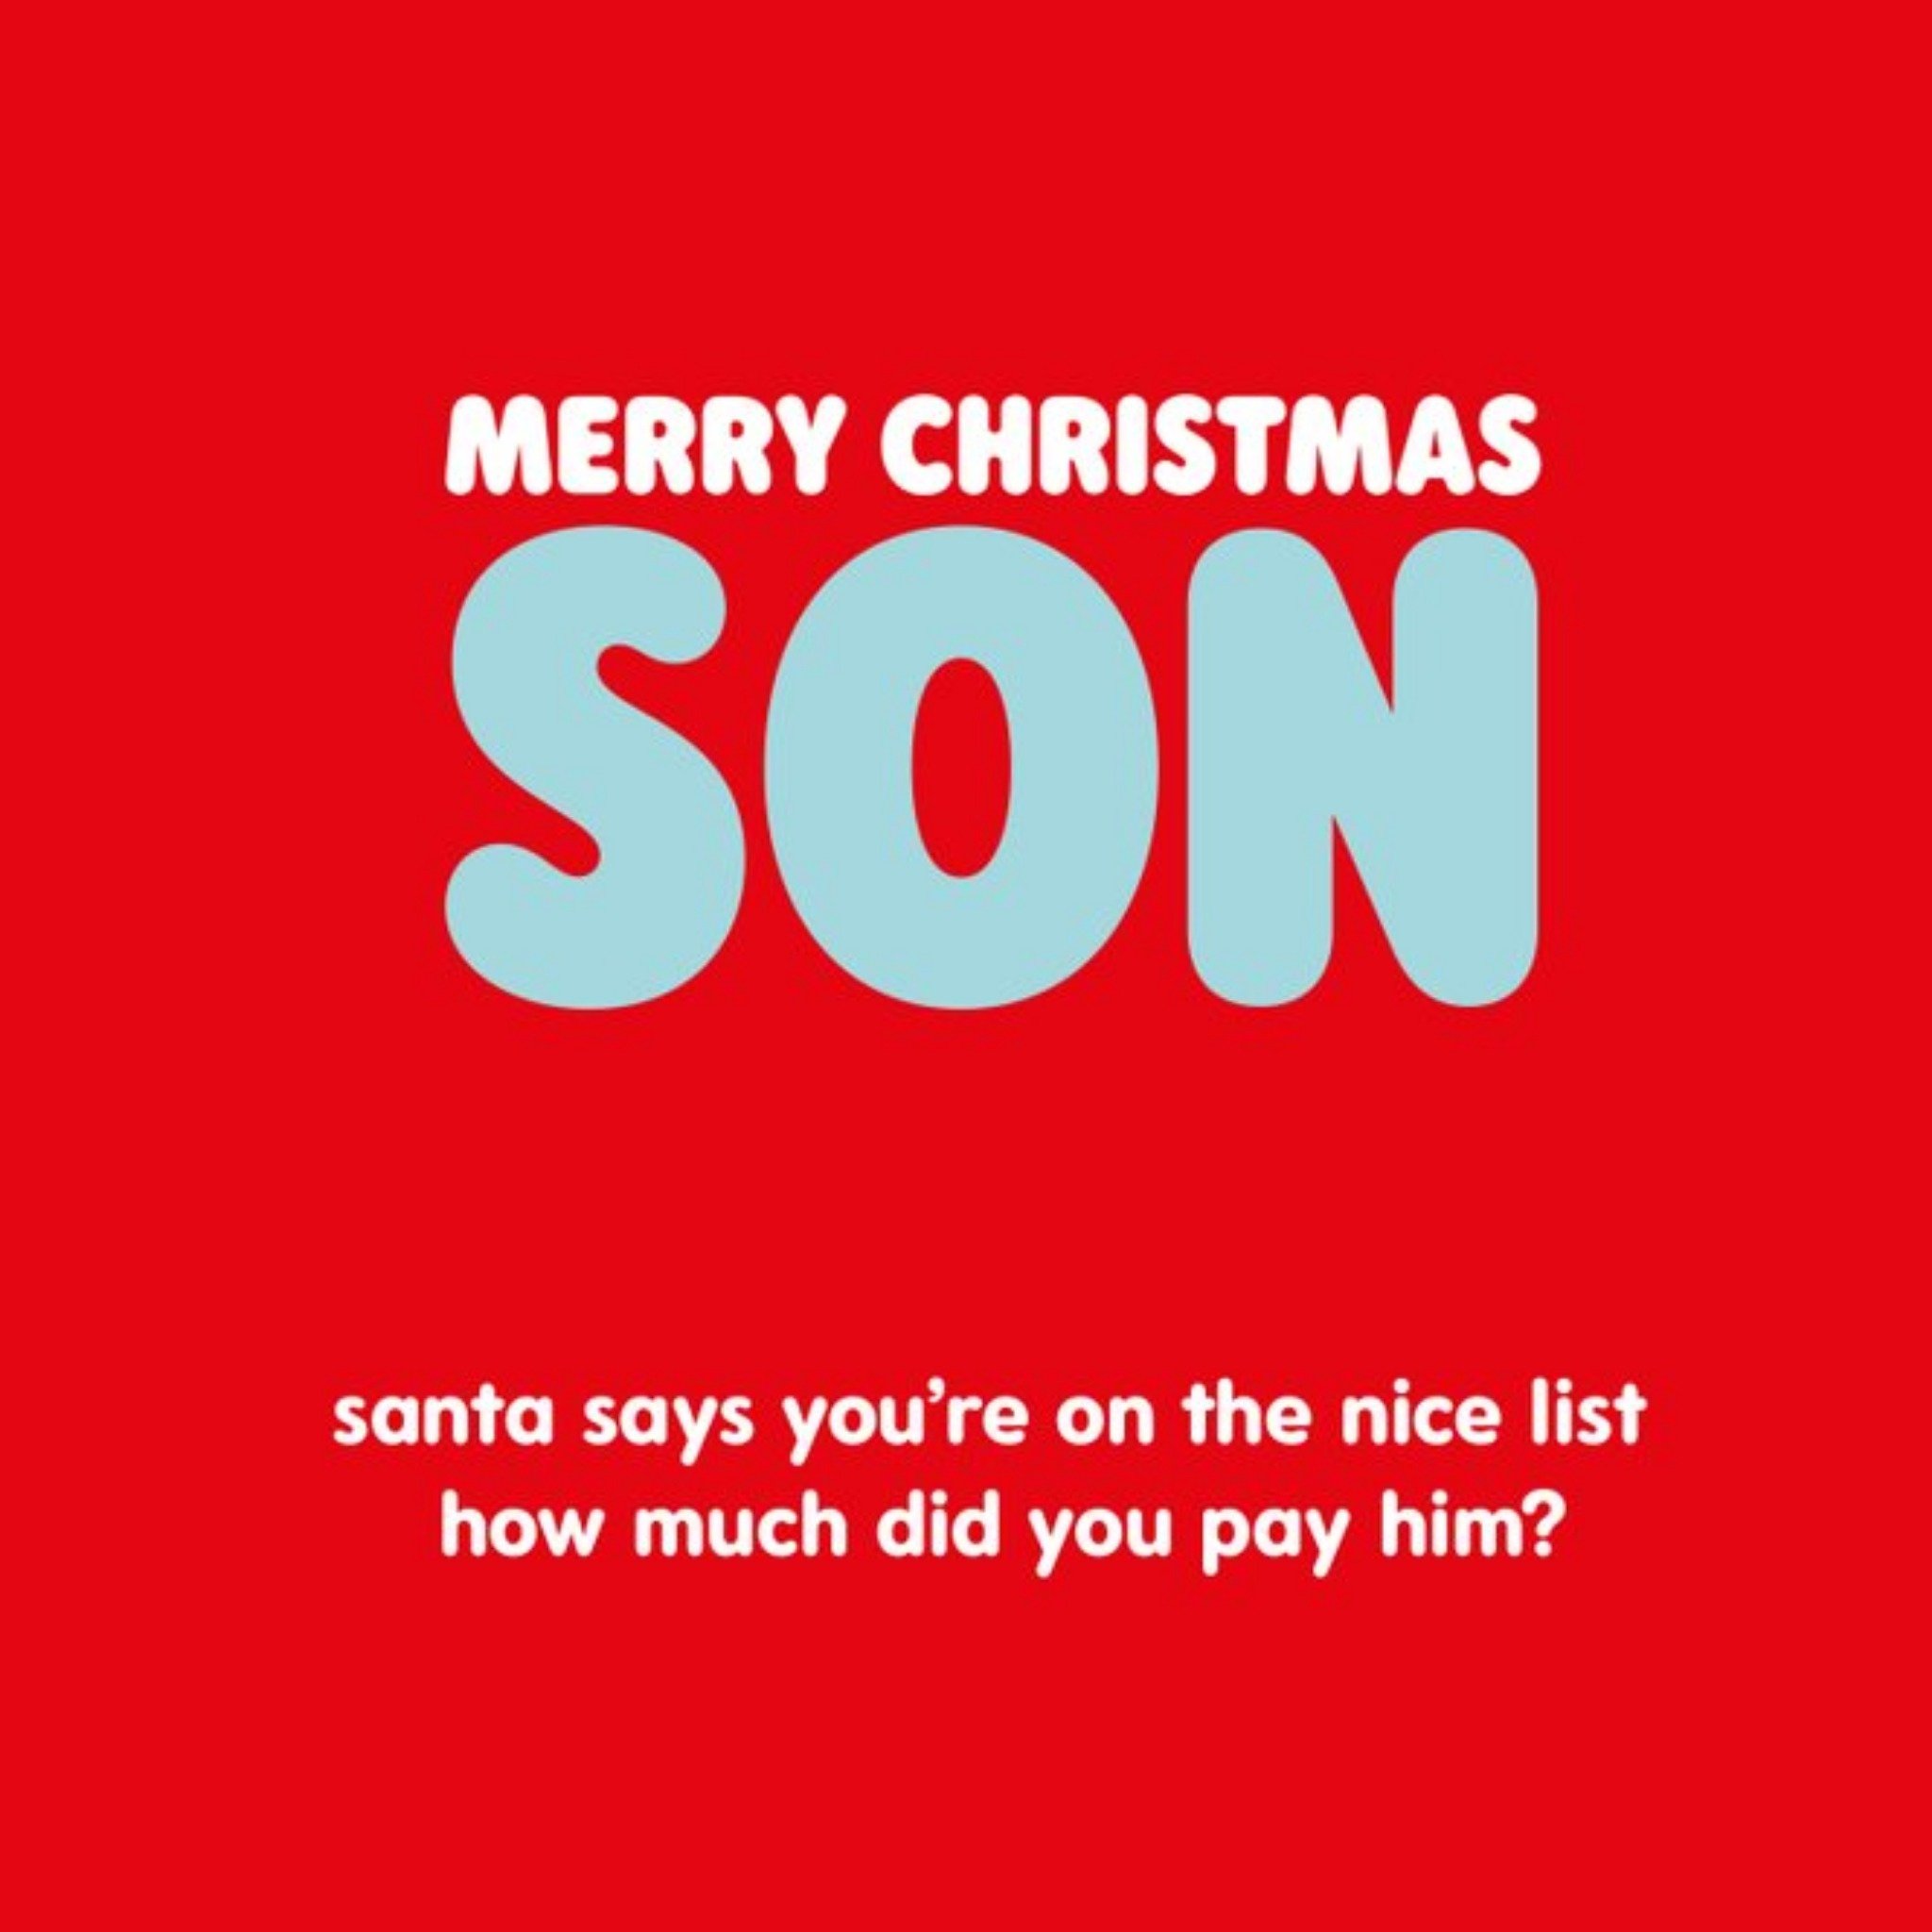 Moonpig Typographical Merry Christmas Son Santa Says Your On The Nice List How Much Did You Pay, Lar